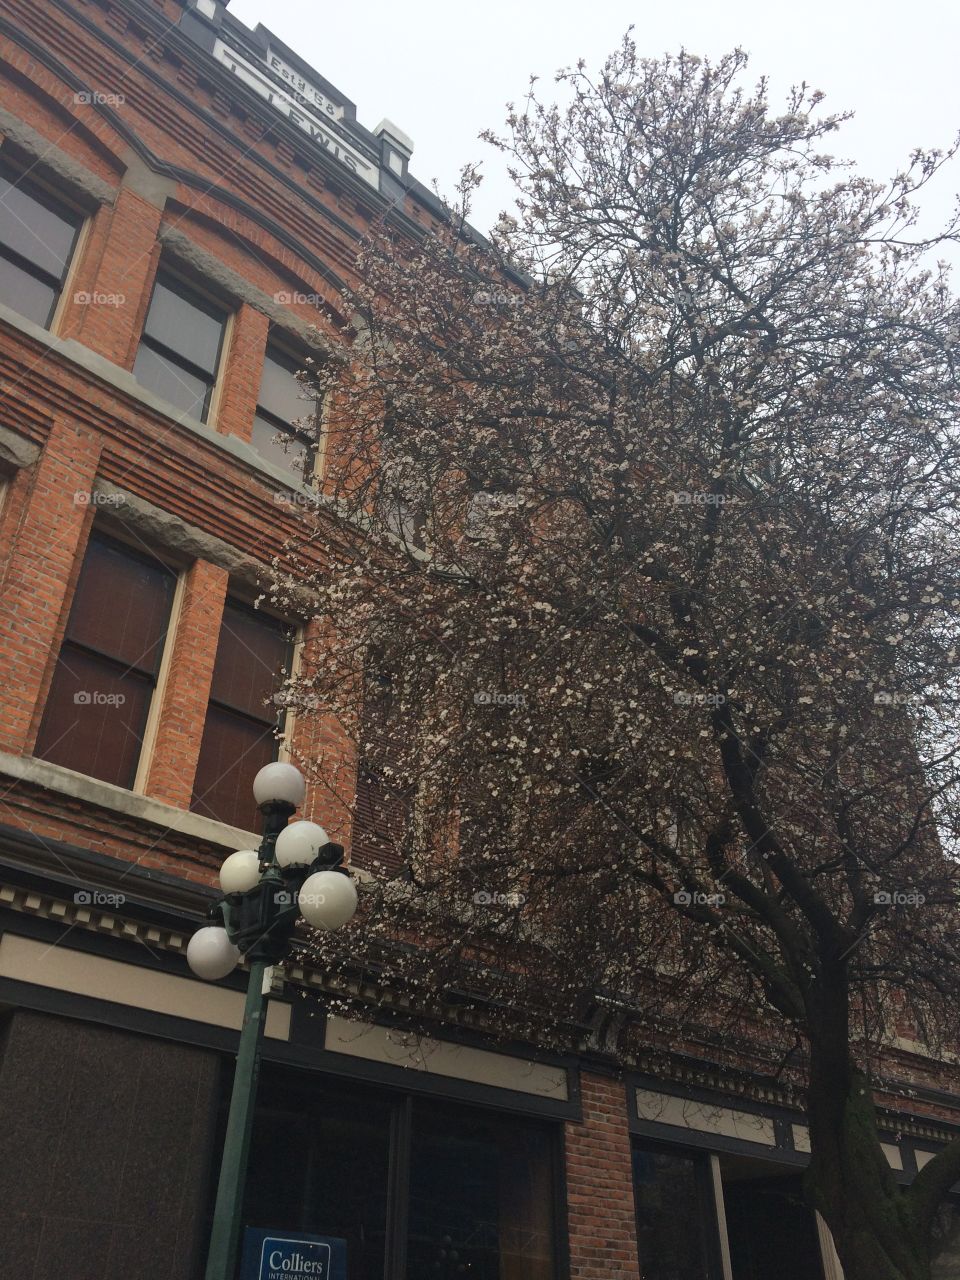 Cherry blossoms in bloom outside a brick building with street lamp 